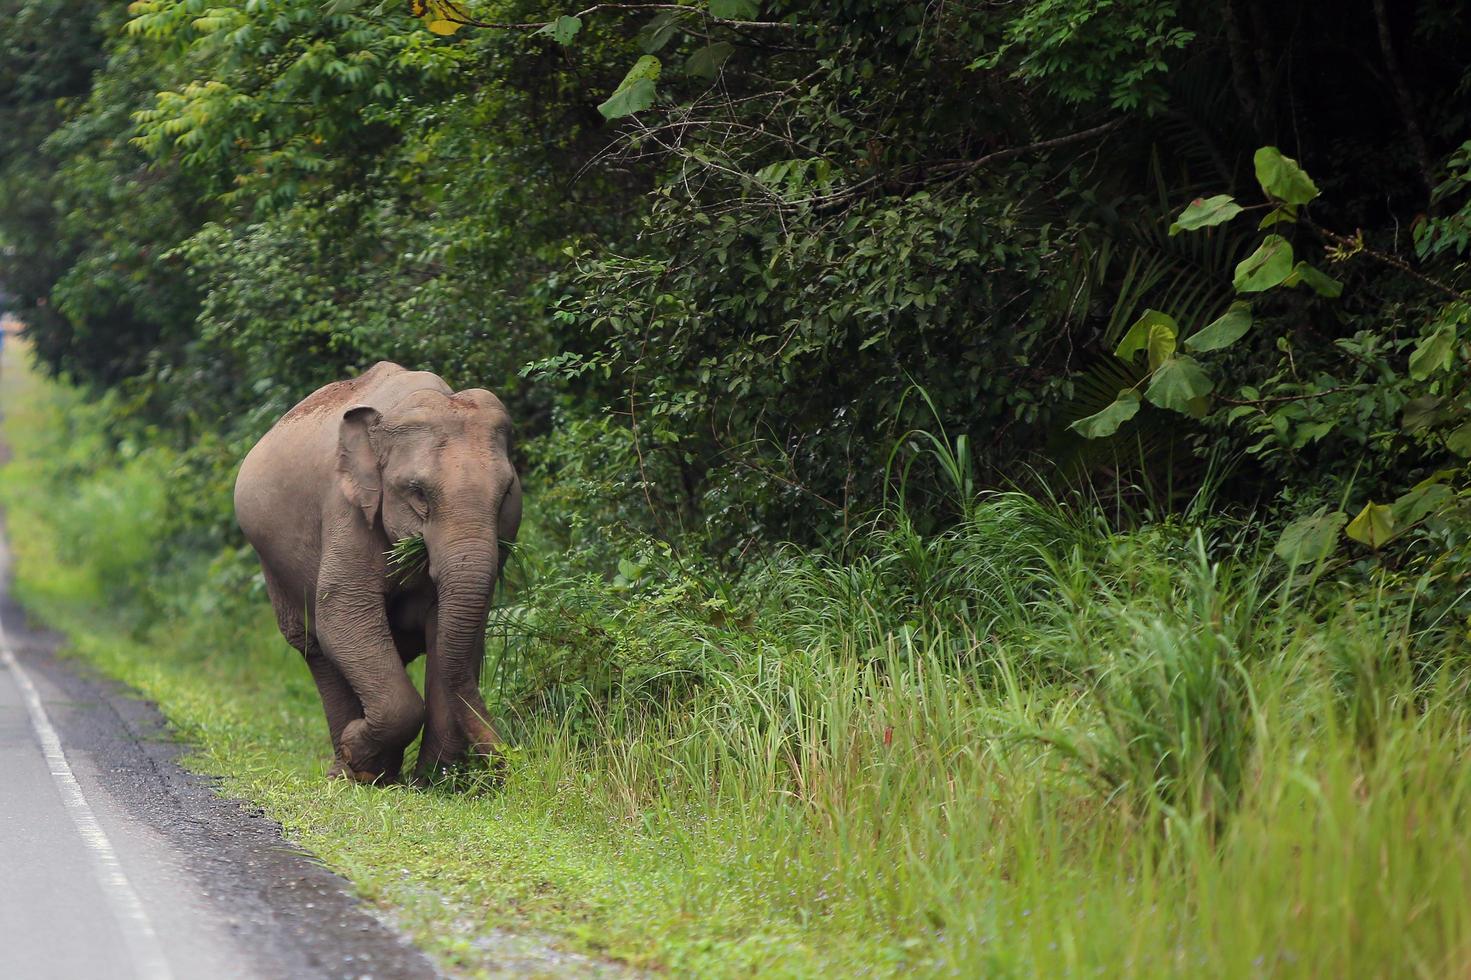 Elephant walking beside the road in national park. photo